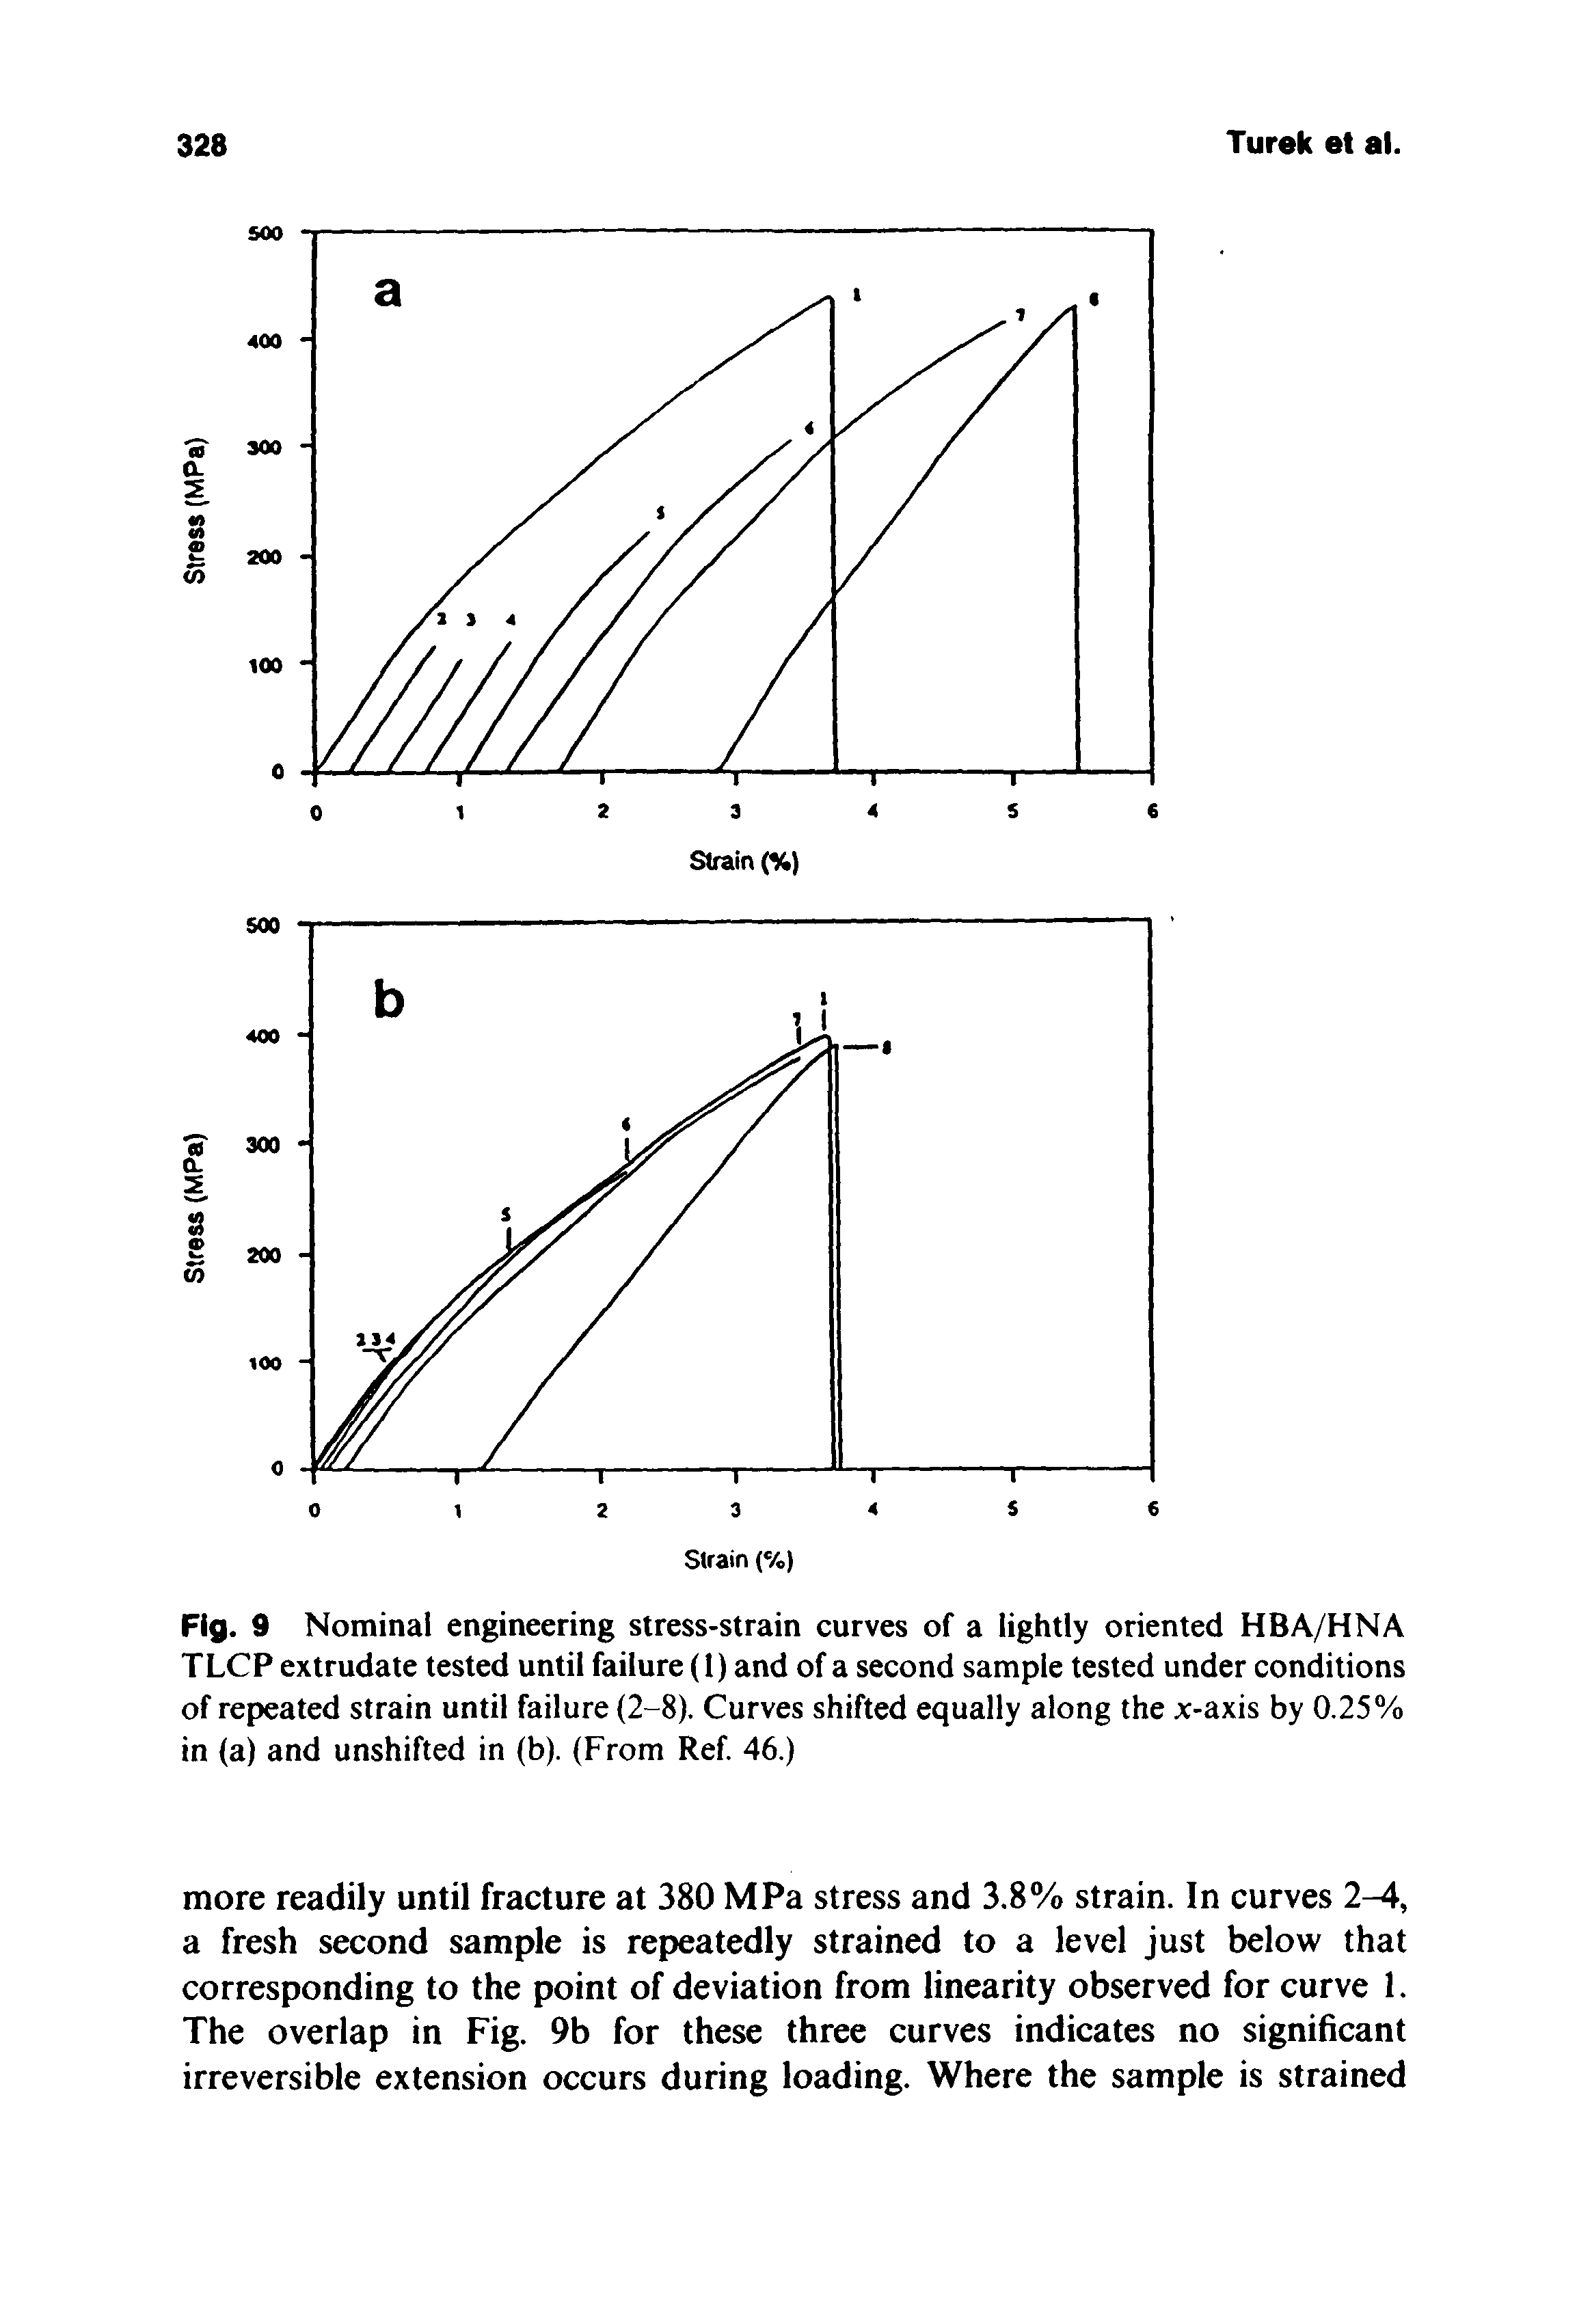 Fig. 9 Nominal engineering stress-strain curves of a lightly oriented HBA/HNA TLCP extrudate tested until failure (1) and of a second sample tested under conditions of repeated strain until failure (2-8). Curves shifted equally along the x-axis by 0.25% in (a) and unshifted in (b). (From Ref. 46.)...